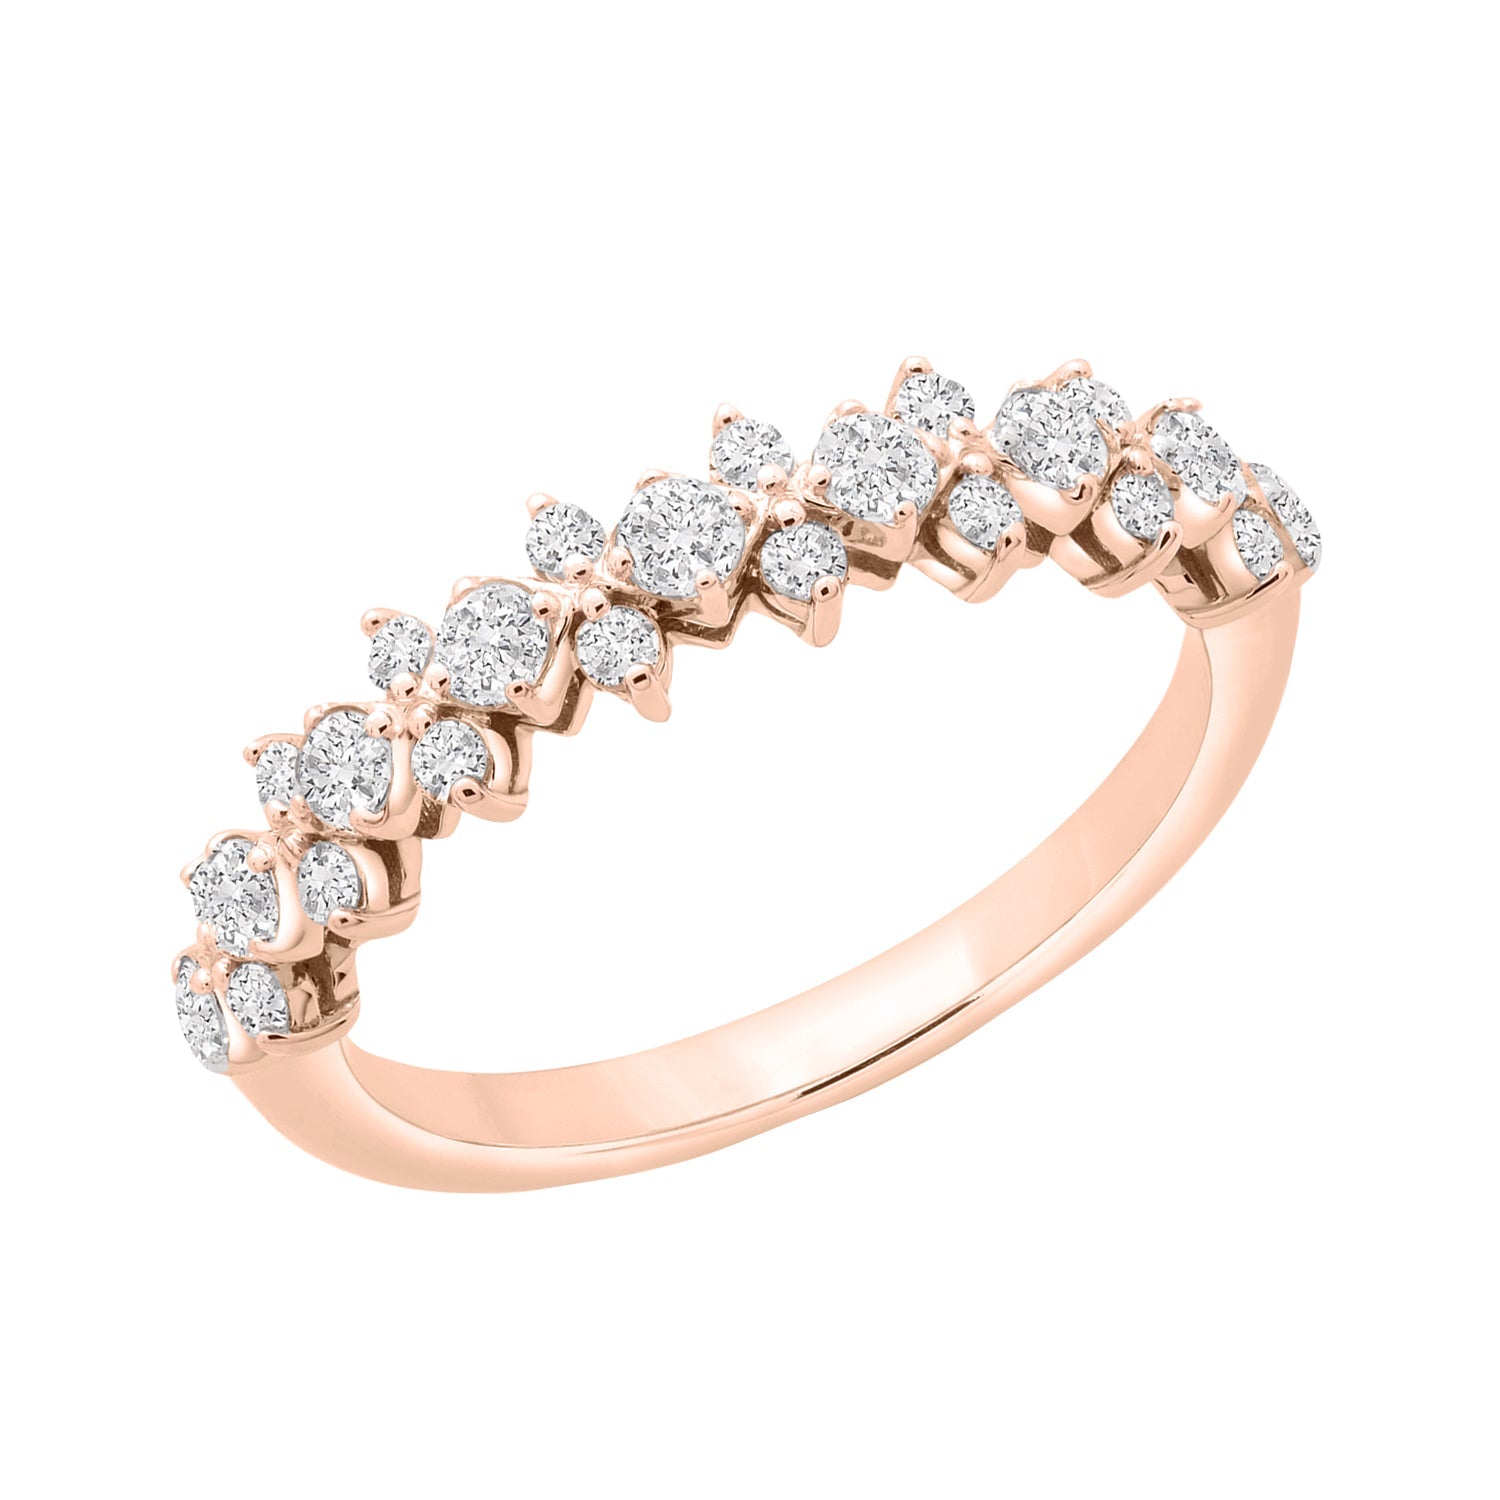 Rory Diamond Ring in Rose Gold